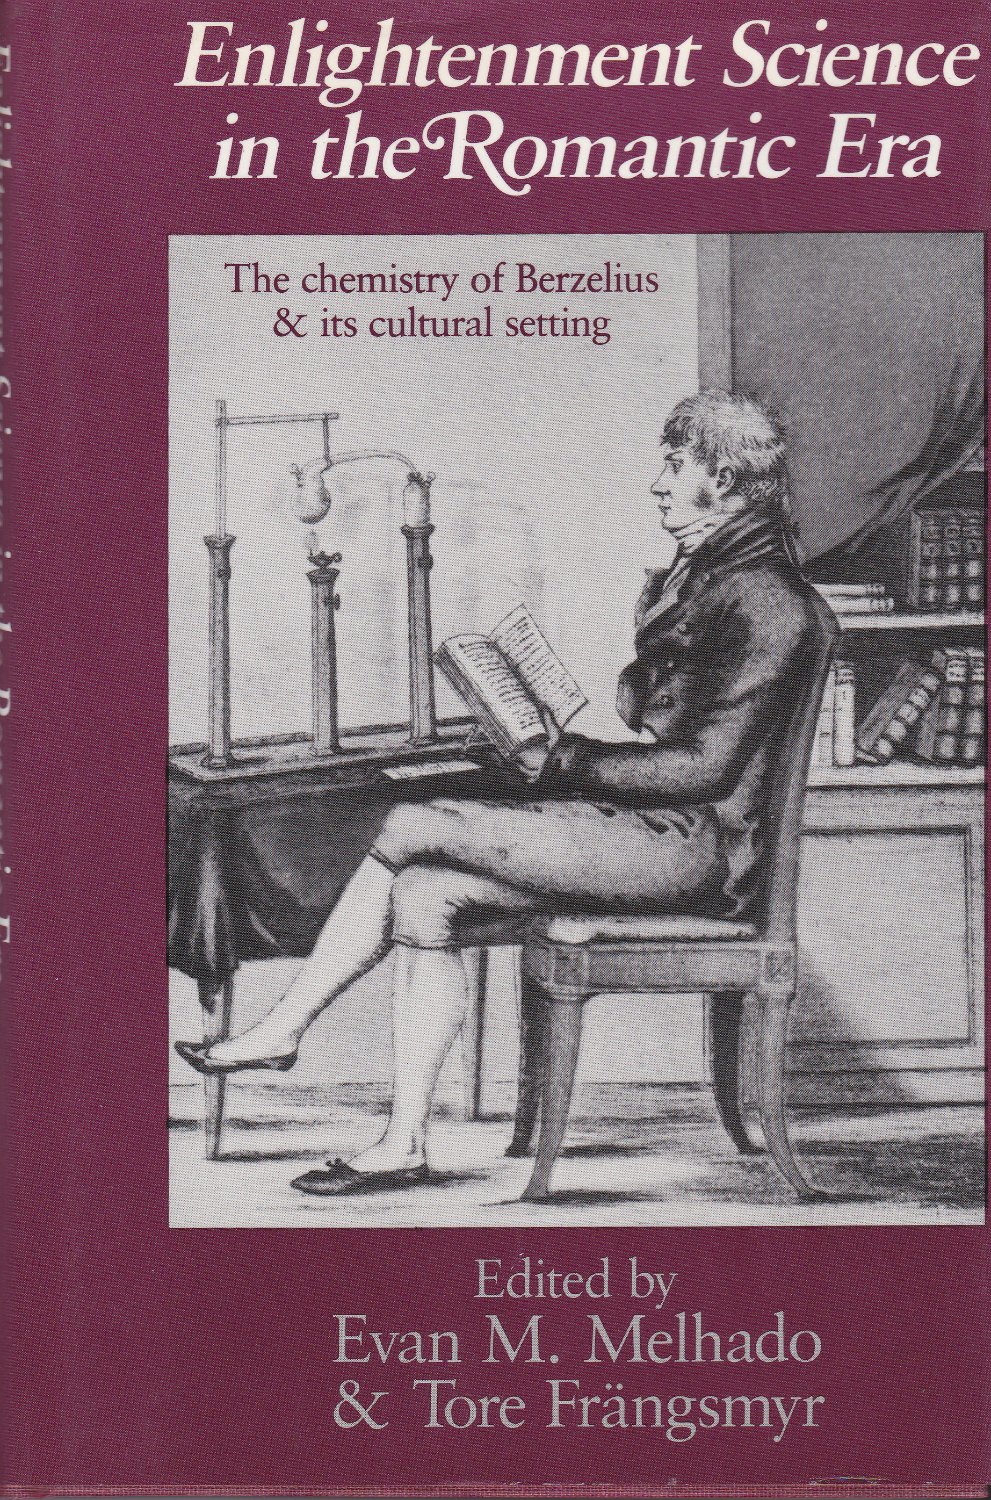 Enlightenment science in the romantic era : the chemistry of Berzelius and its cultural setting.　(Uppsala studies in history of science ; v. 10)